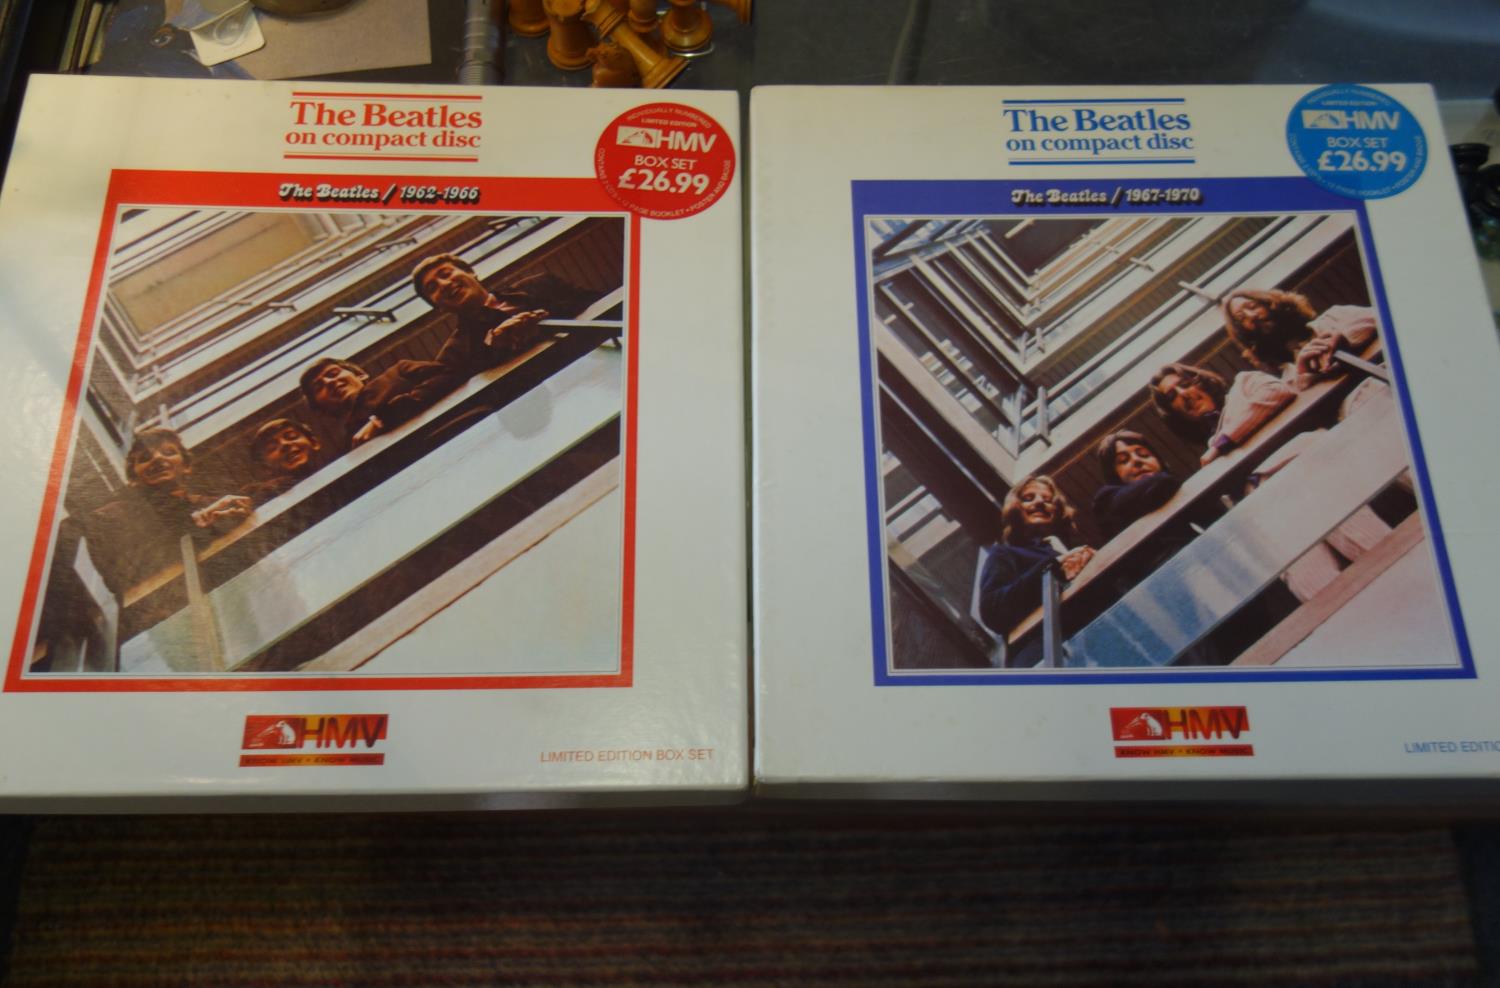 The Beatles 1962-1966-1967-1970, boxed cd set both with original badges limited edition sets